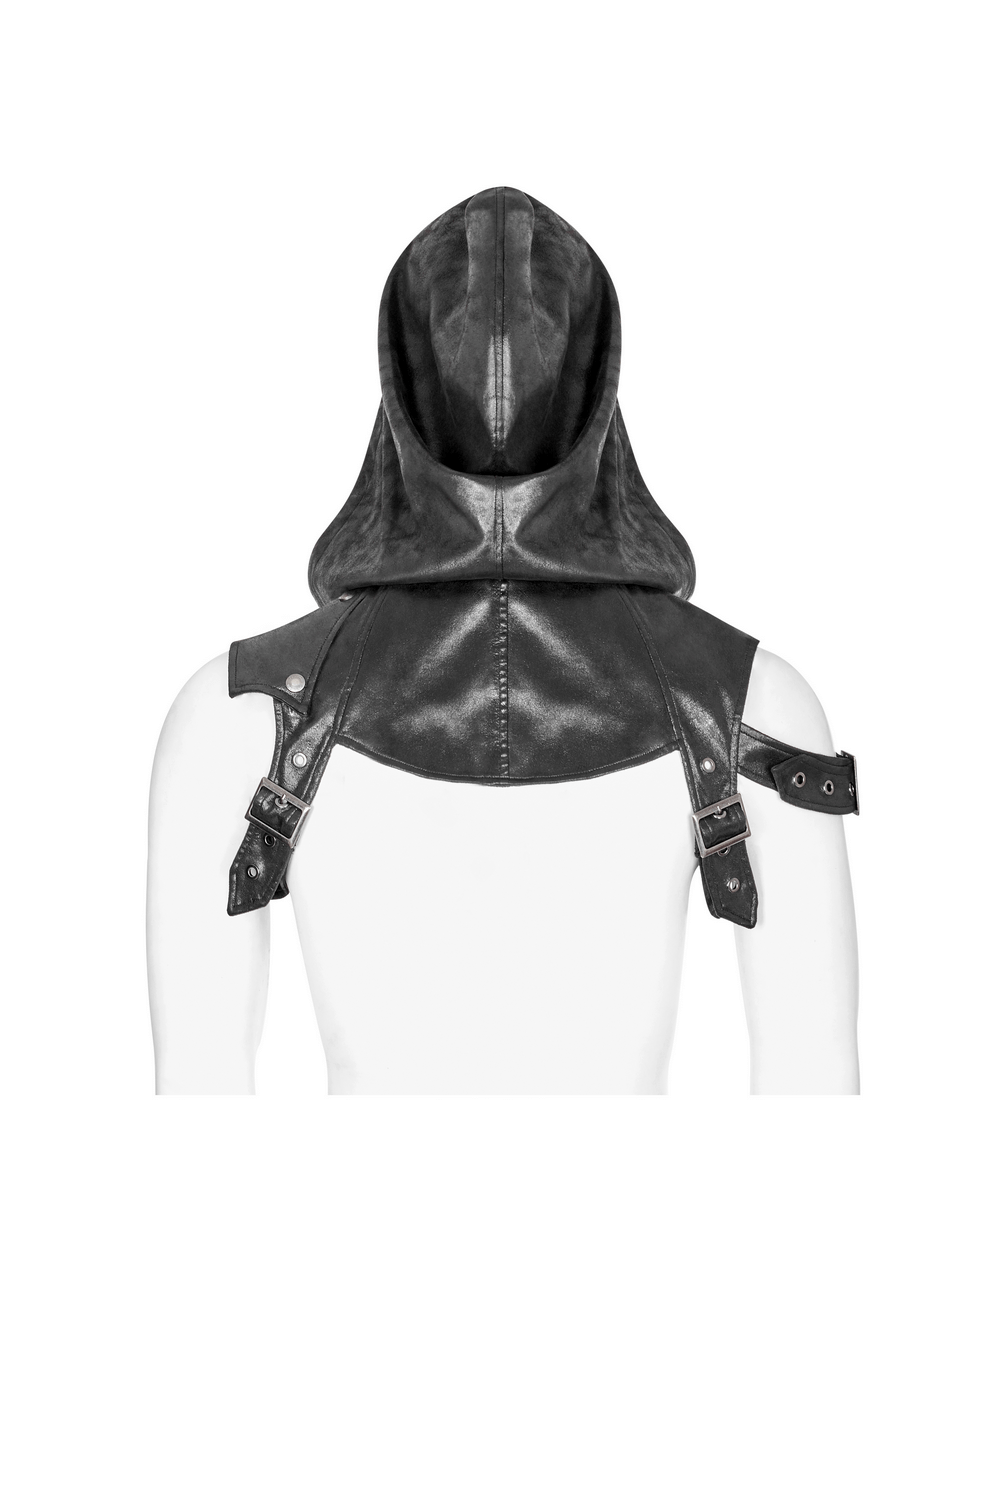 Crack Skin Stitched Punk Hood with Corns and Tie Rope